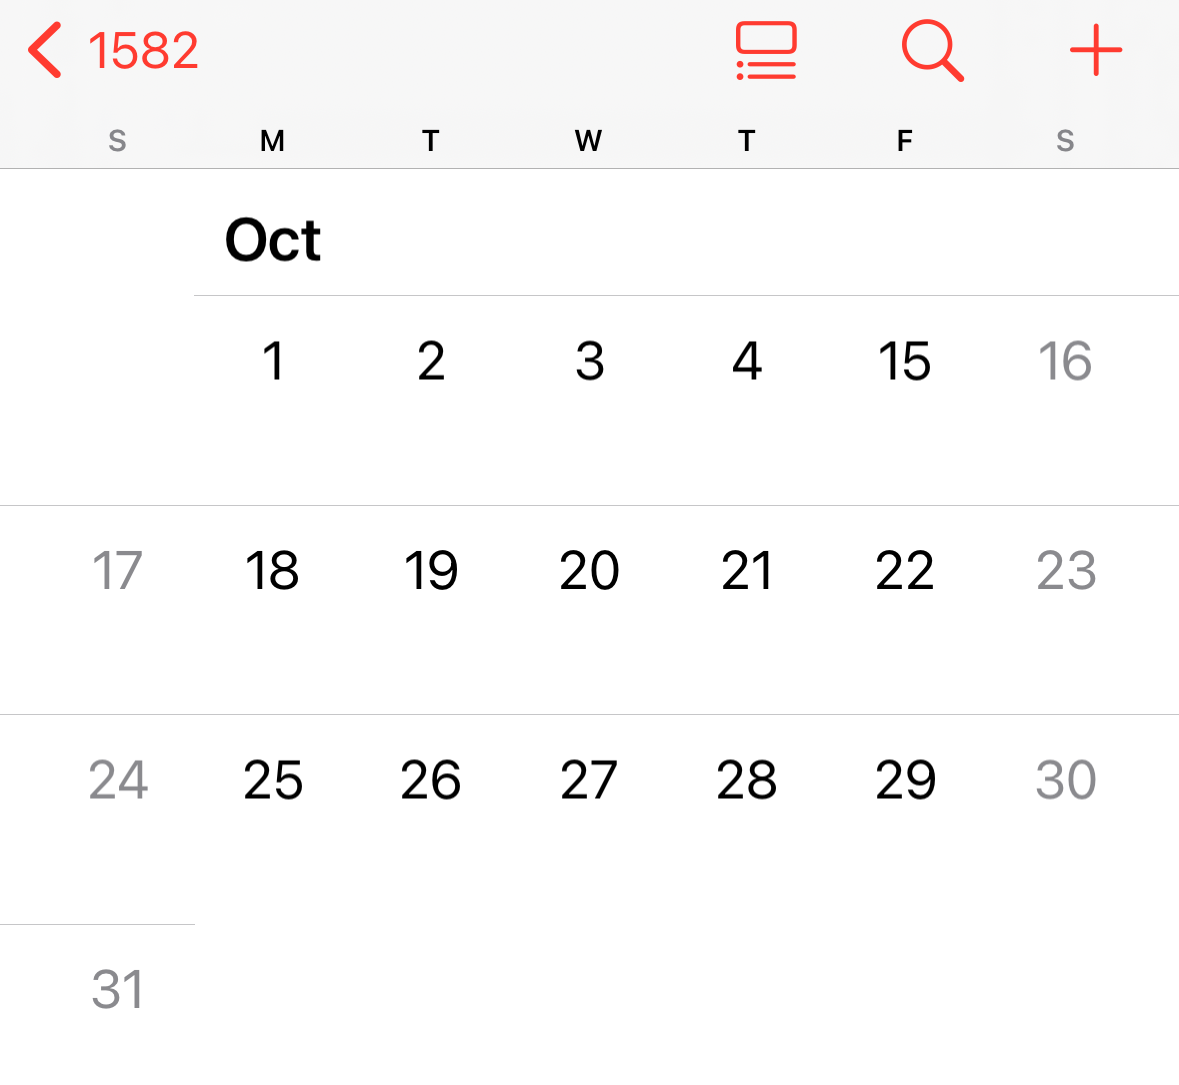 Calendar app displaying the month of October with dates 24 to 31 visible